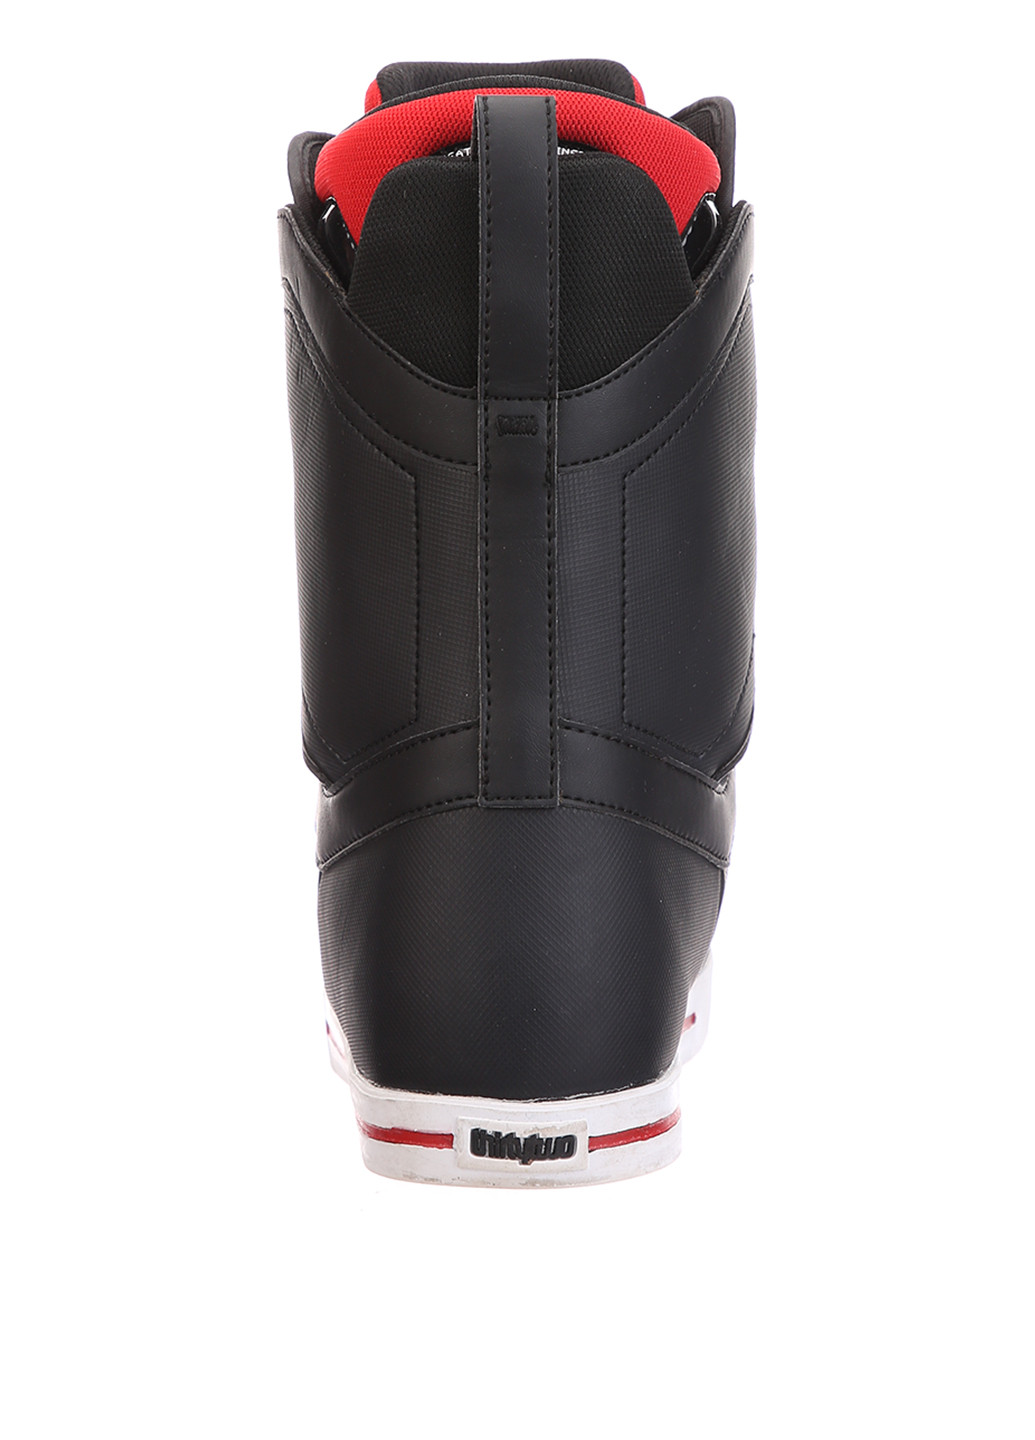 Сноубутси Thirtytwo thirtytwo black with red and white sole (201481604)